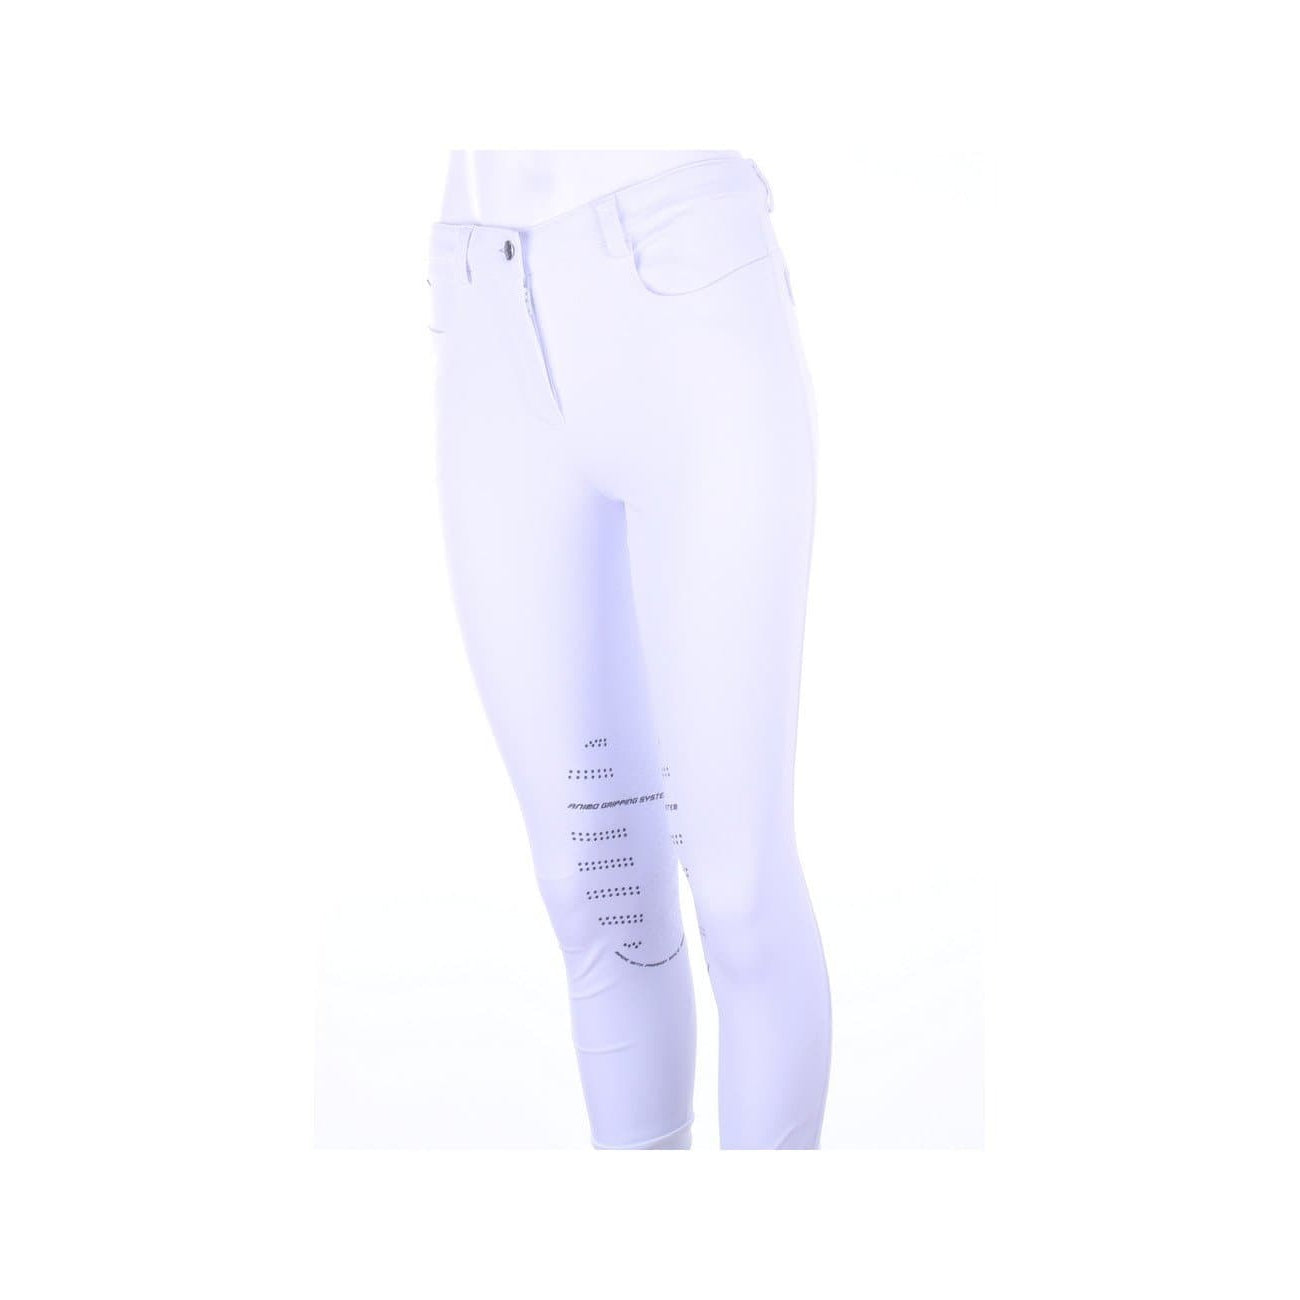 White Animo riding breeches on a mannequin, no background visible.